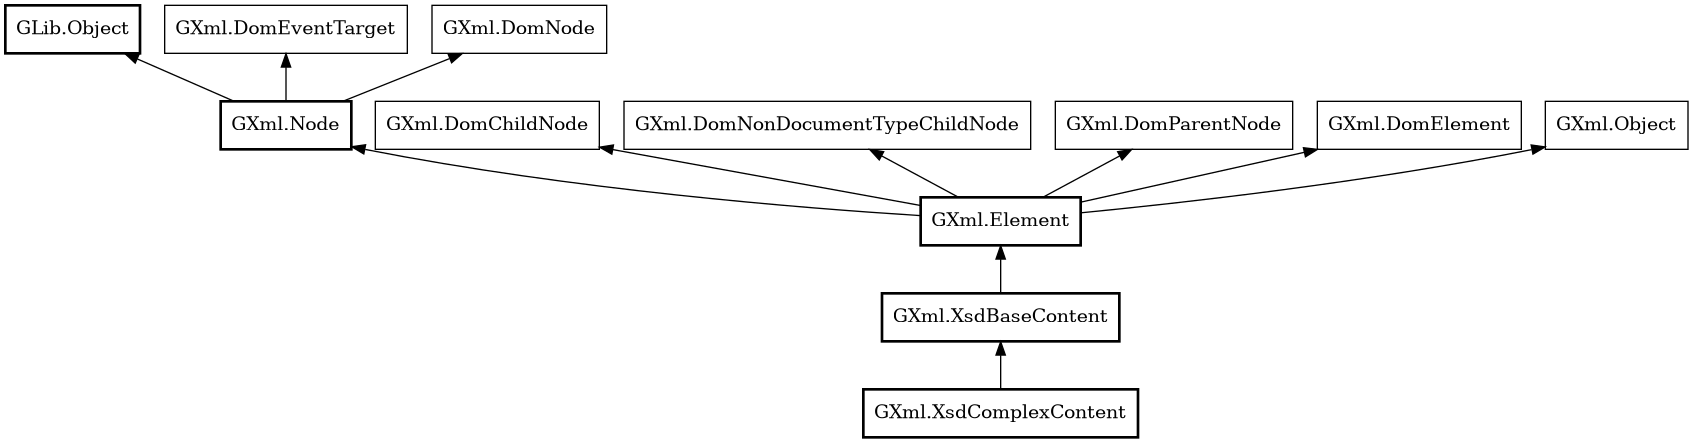 Object hierarchy for XsdComplexContent